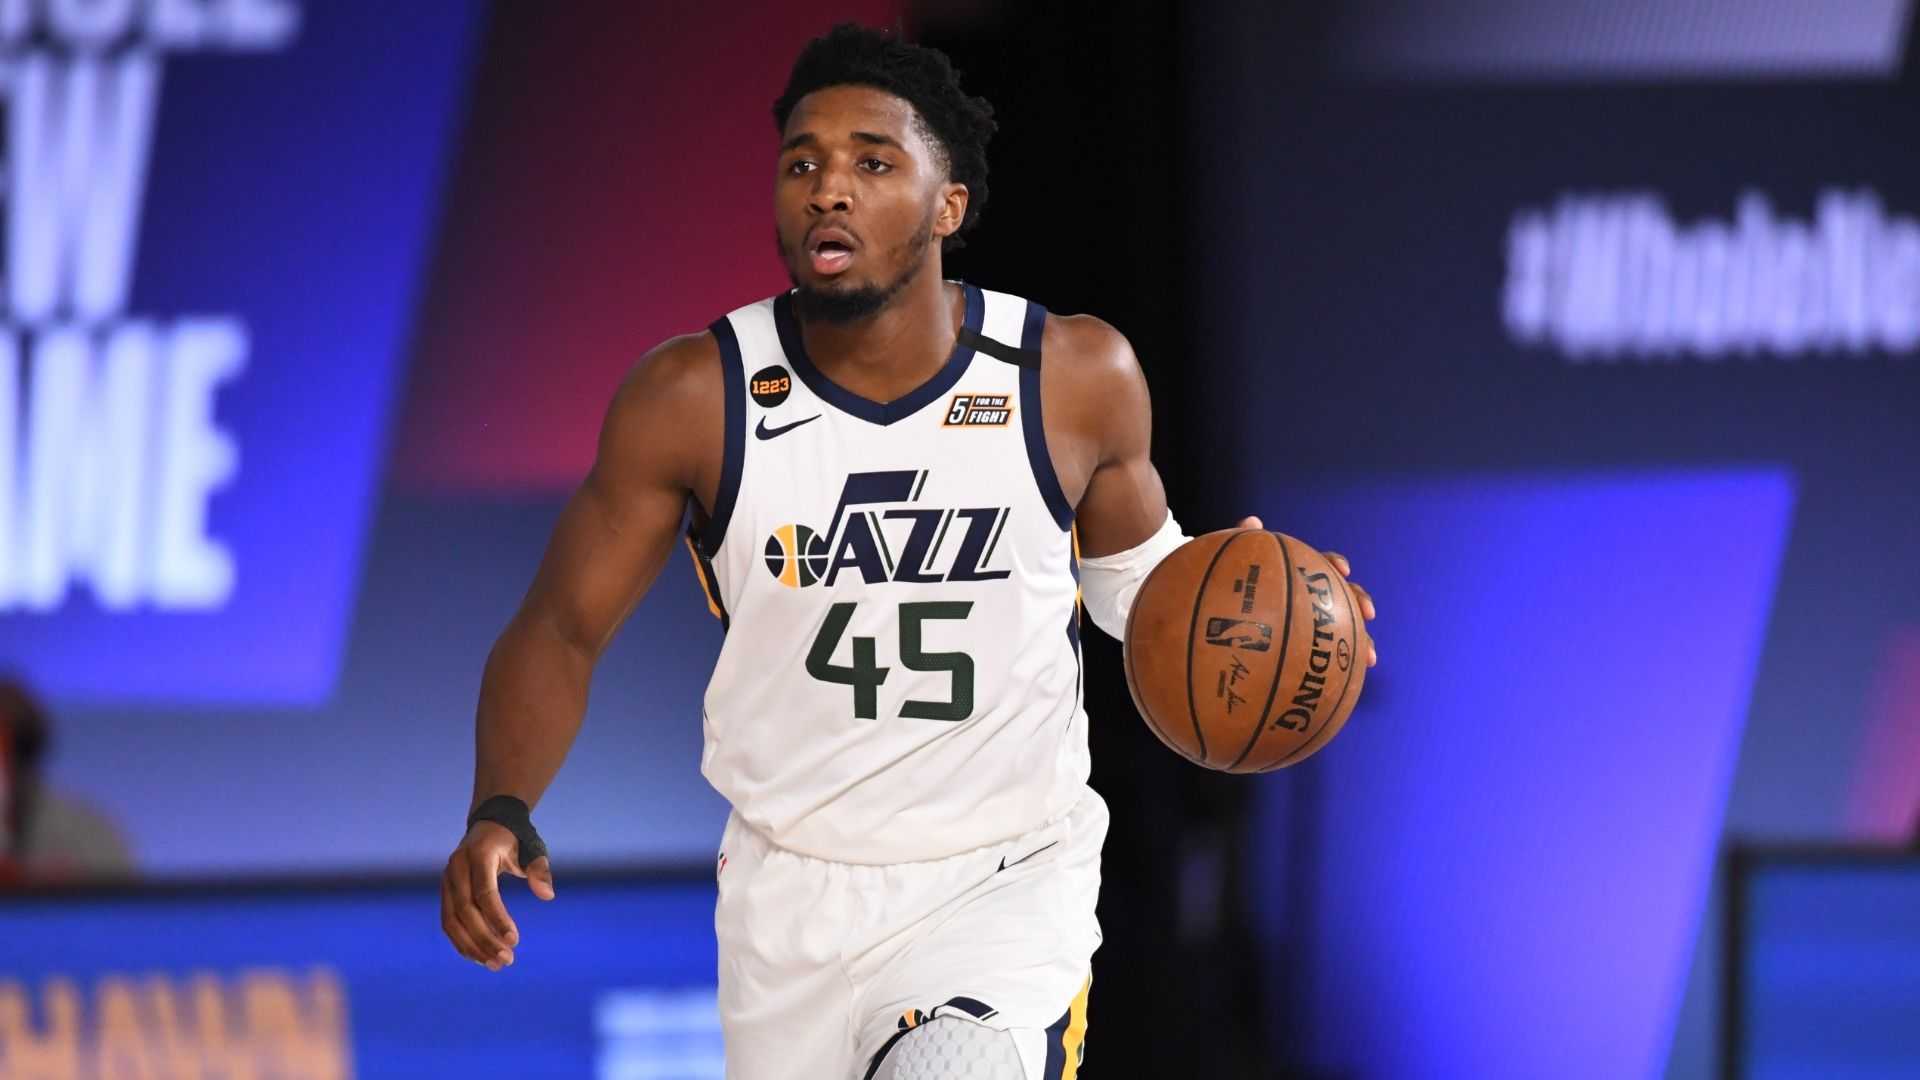  NBA Playoffs Daily Roundup: Donovan Mitchell Gets Revenge in Game 2